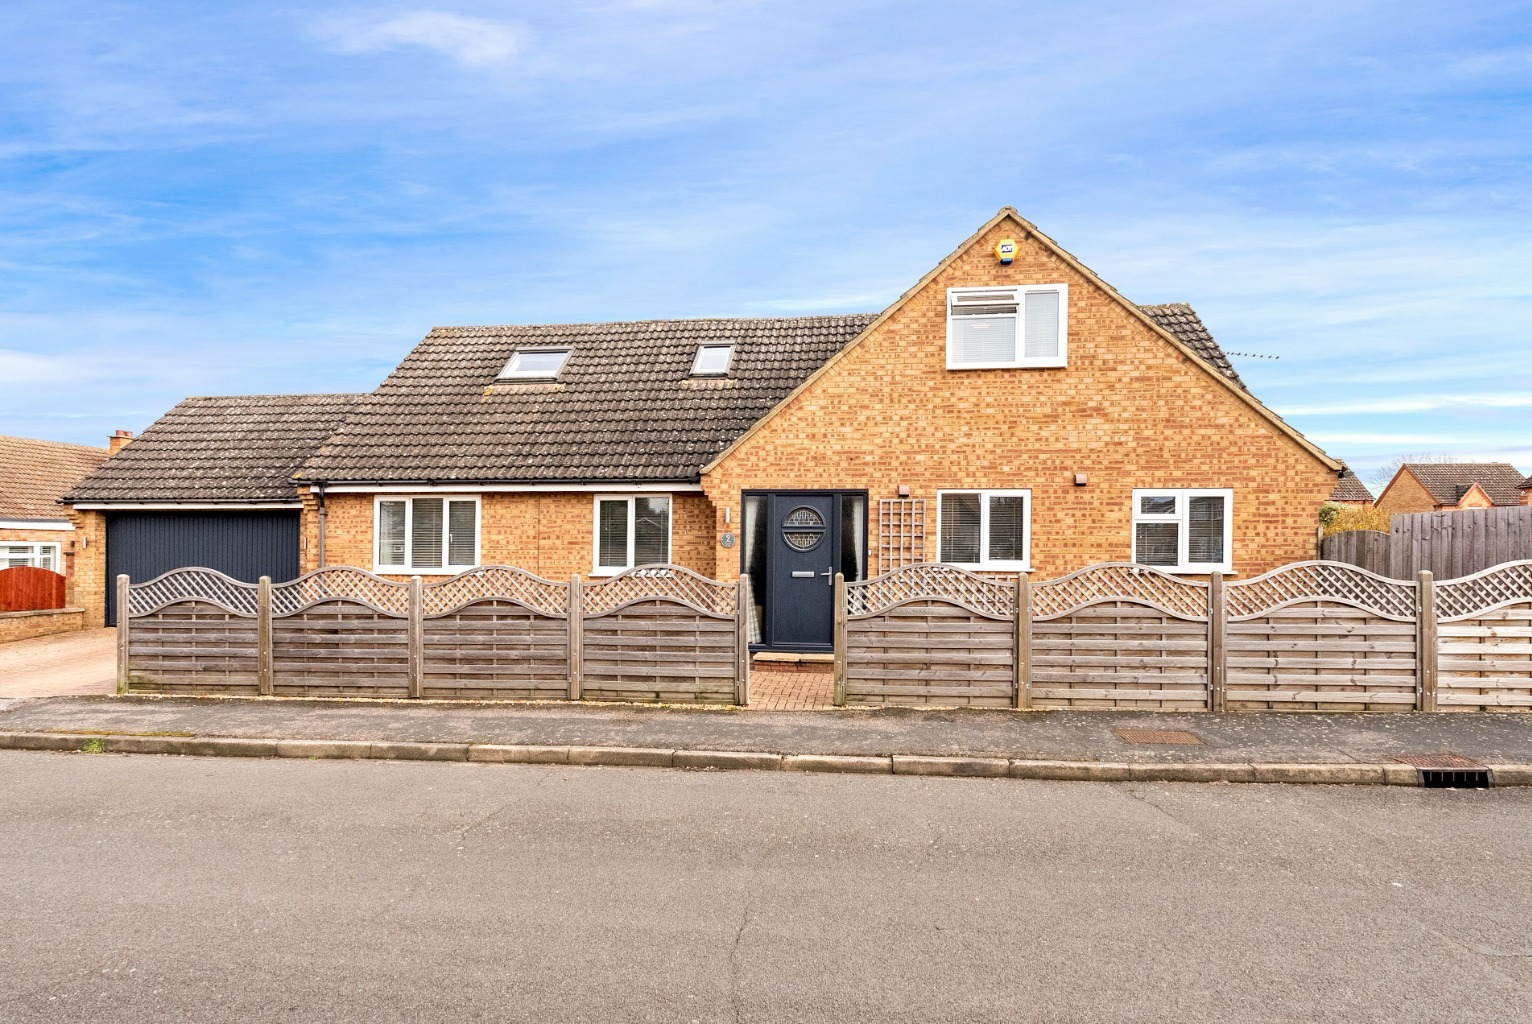 5 bed detached house for sale in Falstaff Road, St Neots  - Property Image 1